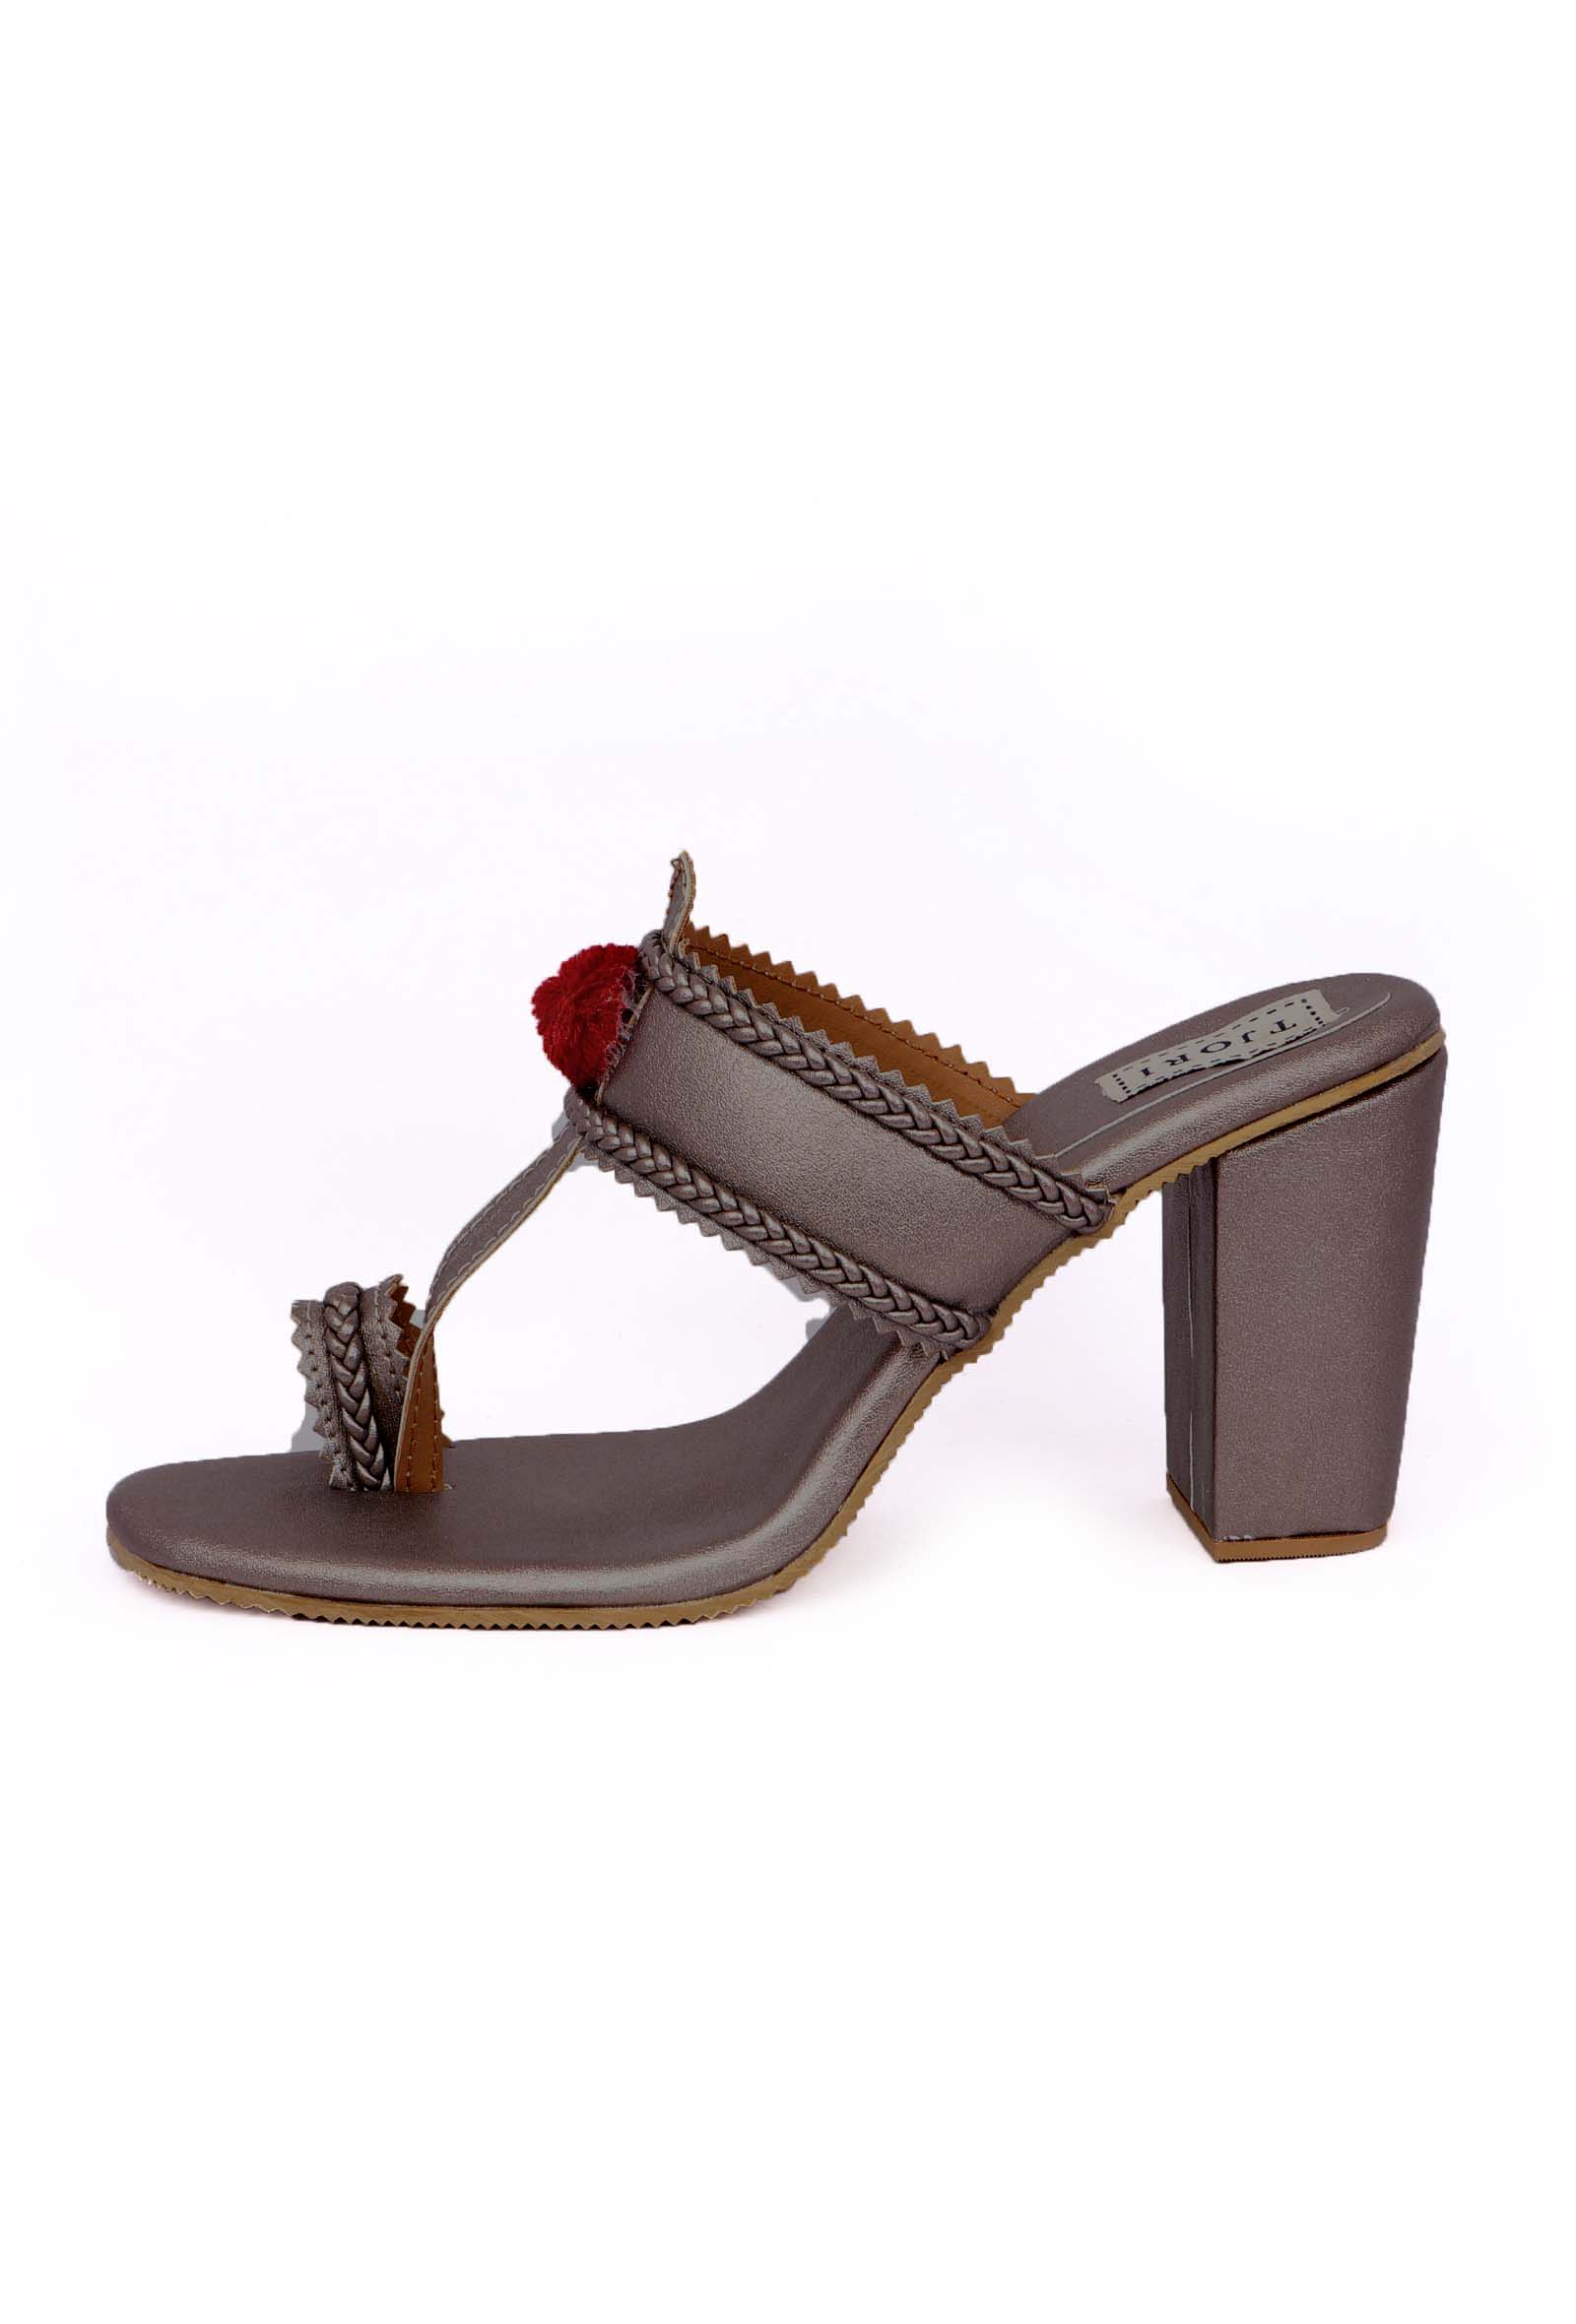 Silver Cruelty-Free Leather Heeled Sandals